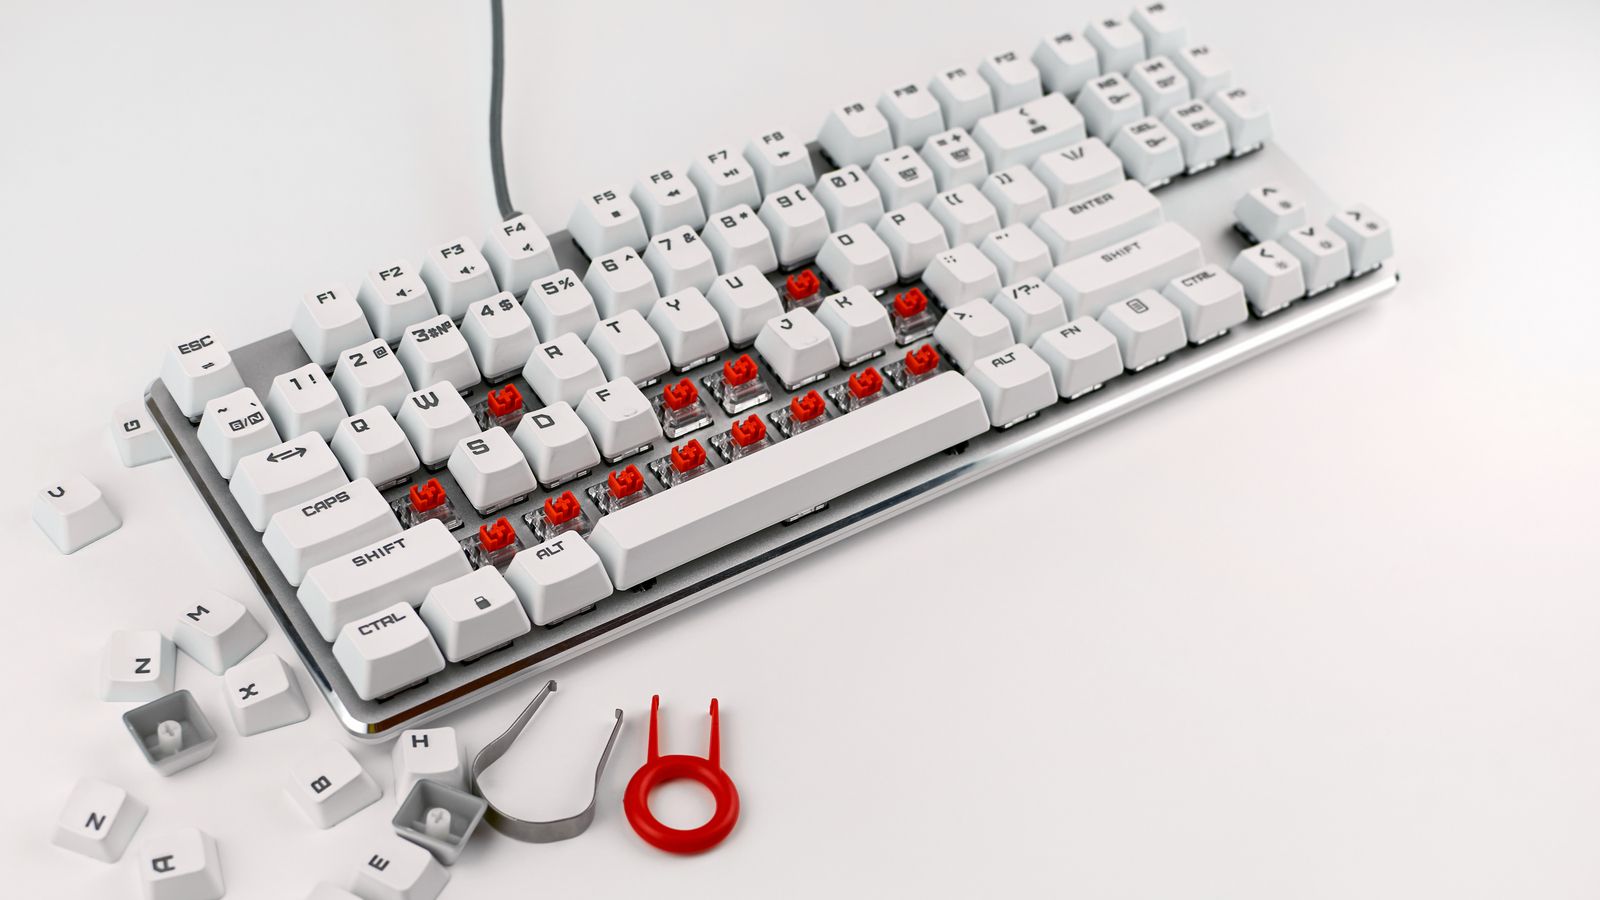 Mechanical keyboard disassembled with tools on a white backdrop